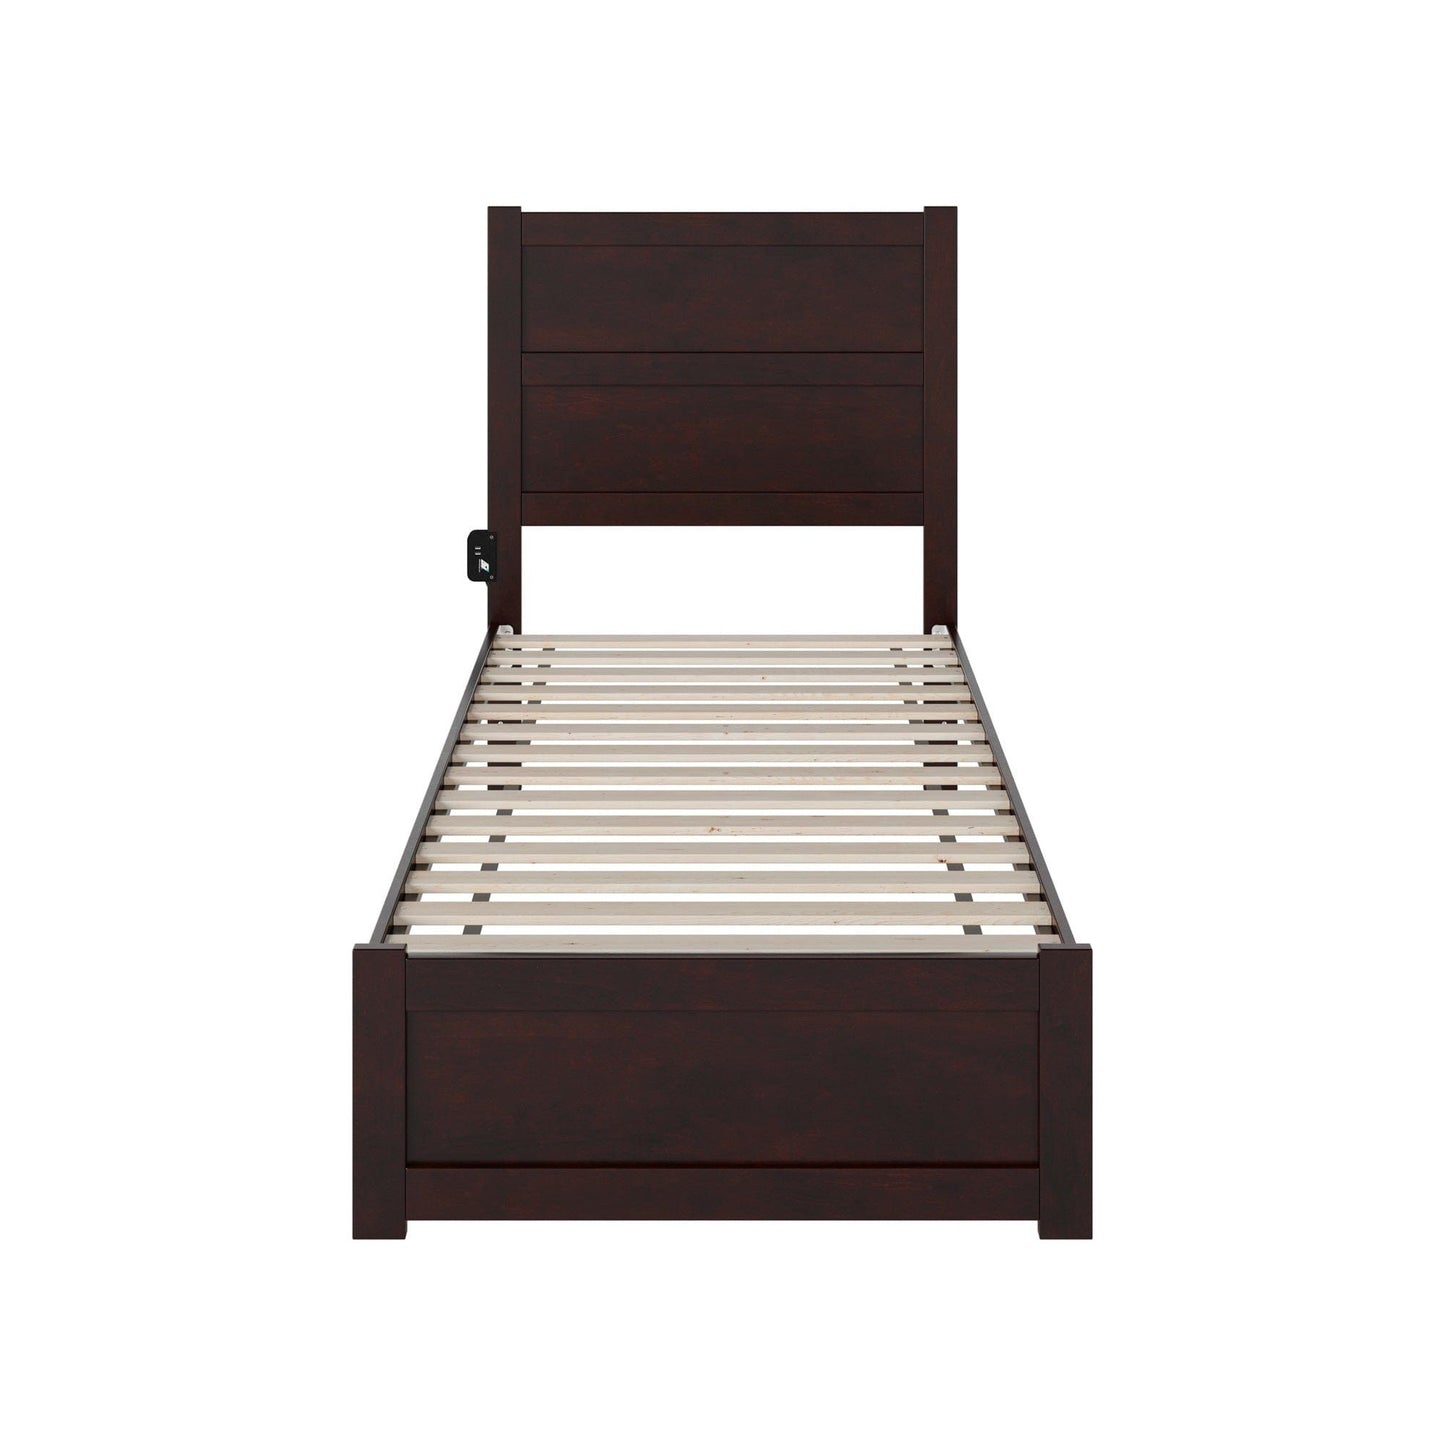 AFI Furnishings NoHo Twin Extra Long Bed with Footboard in Espresso